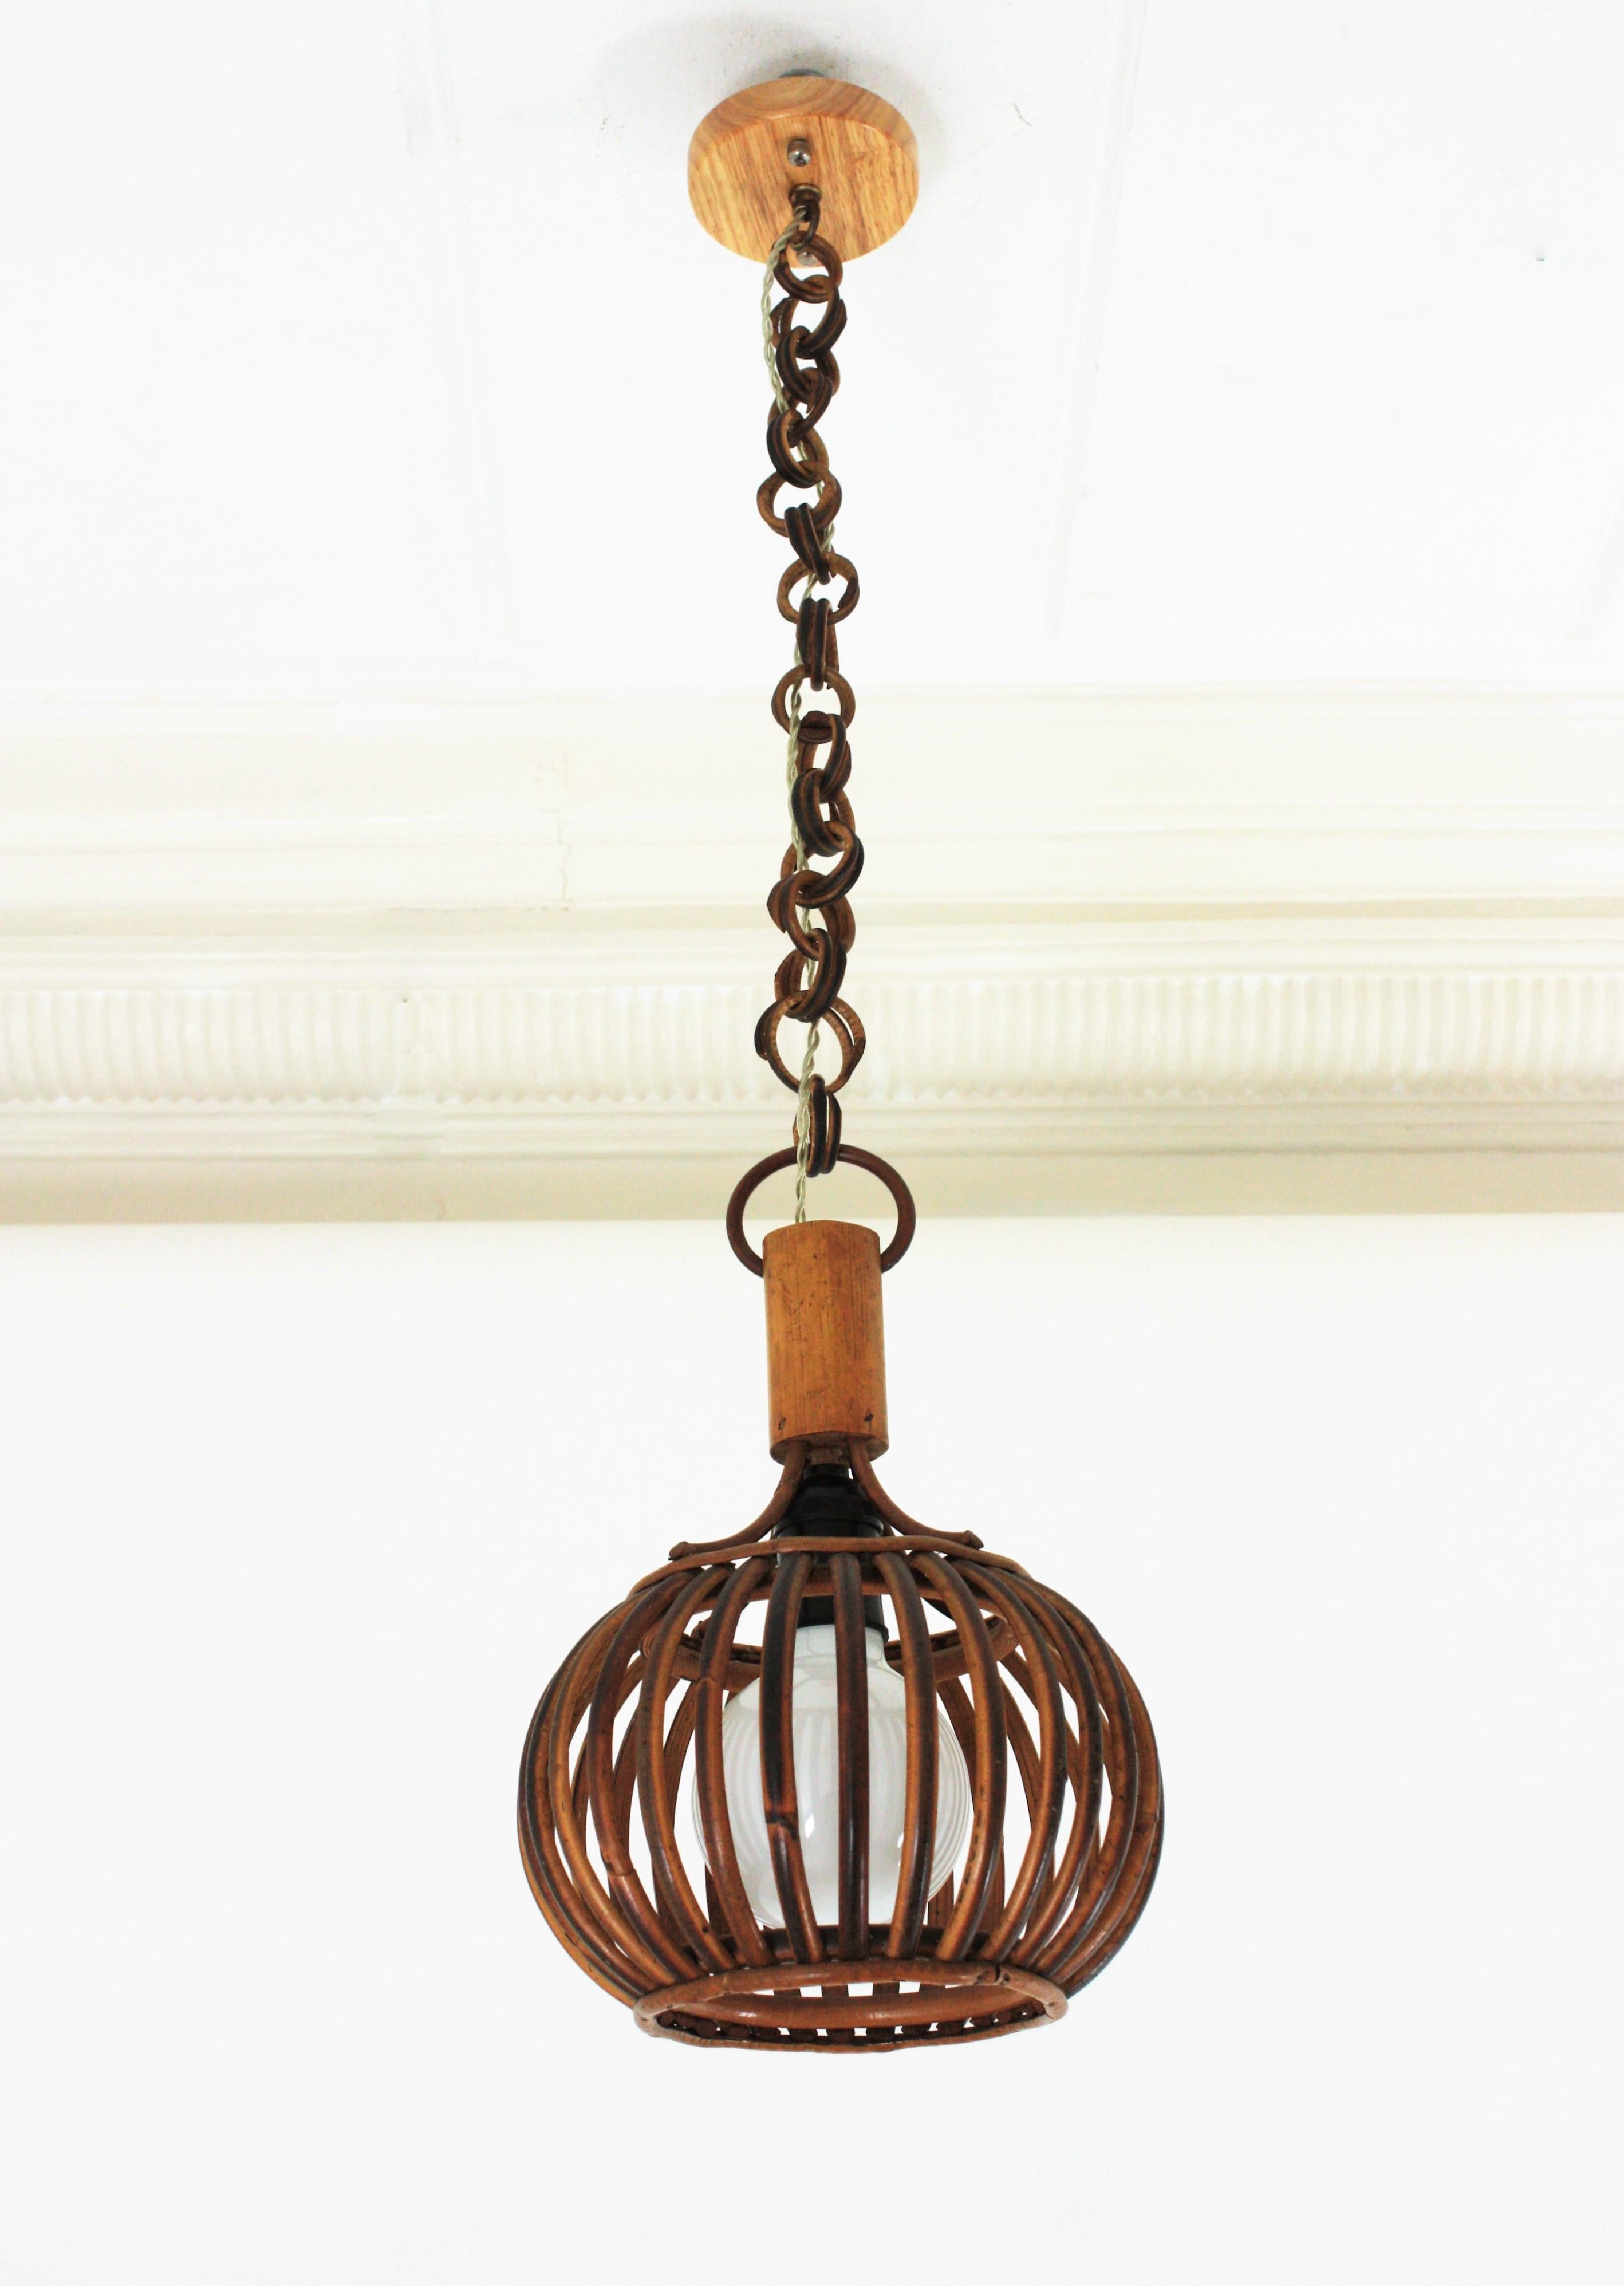 French Louis Sognot Rattan Pendant Hanging Light / Lantern, 1950s For Sale